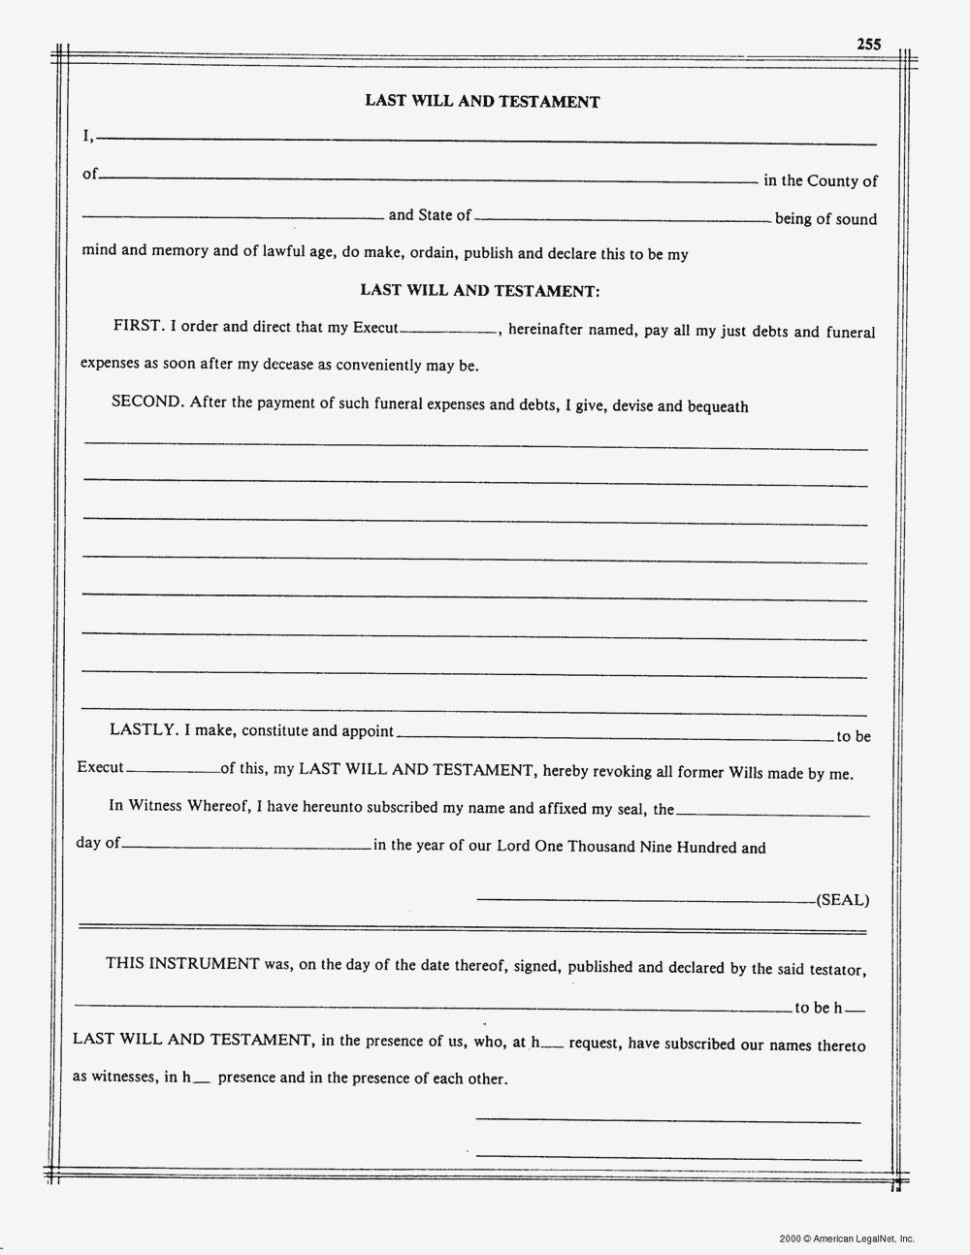 Free Printable Last Will And Testament Forms Nz | Resume Examples - Free Printable Last Will And Testament Forms